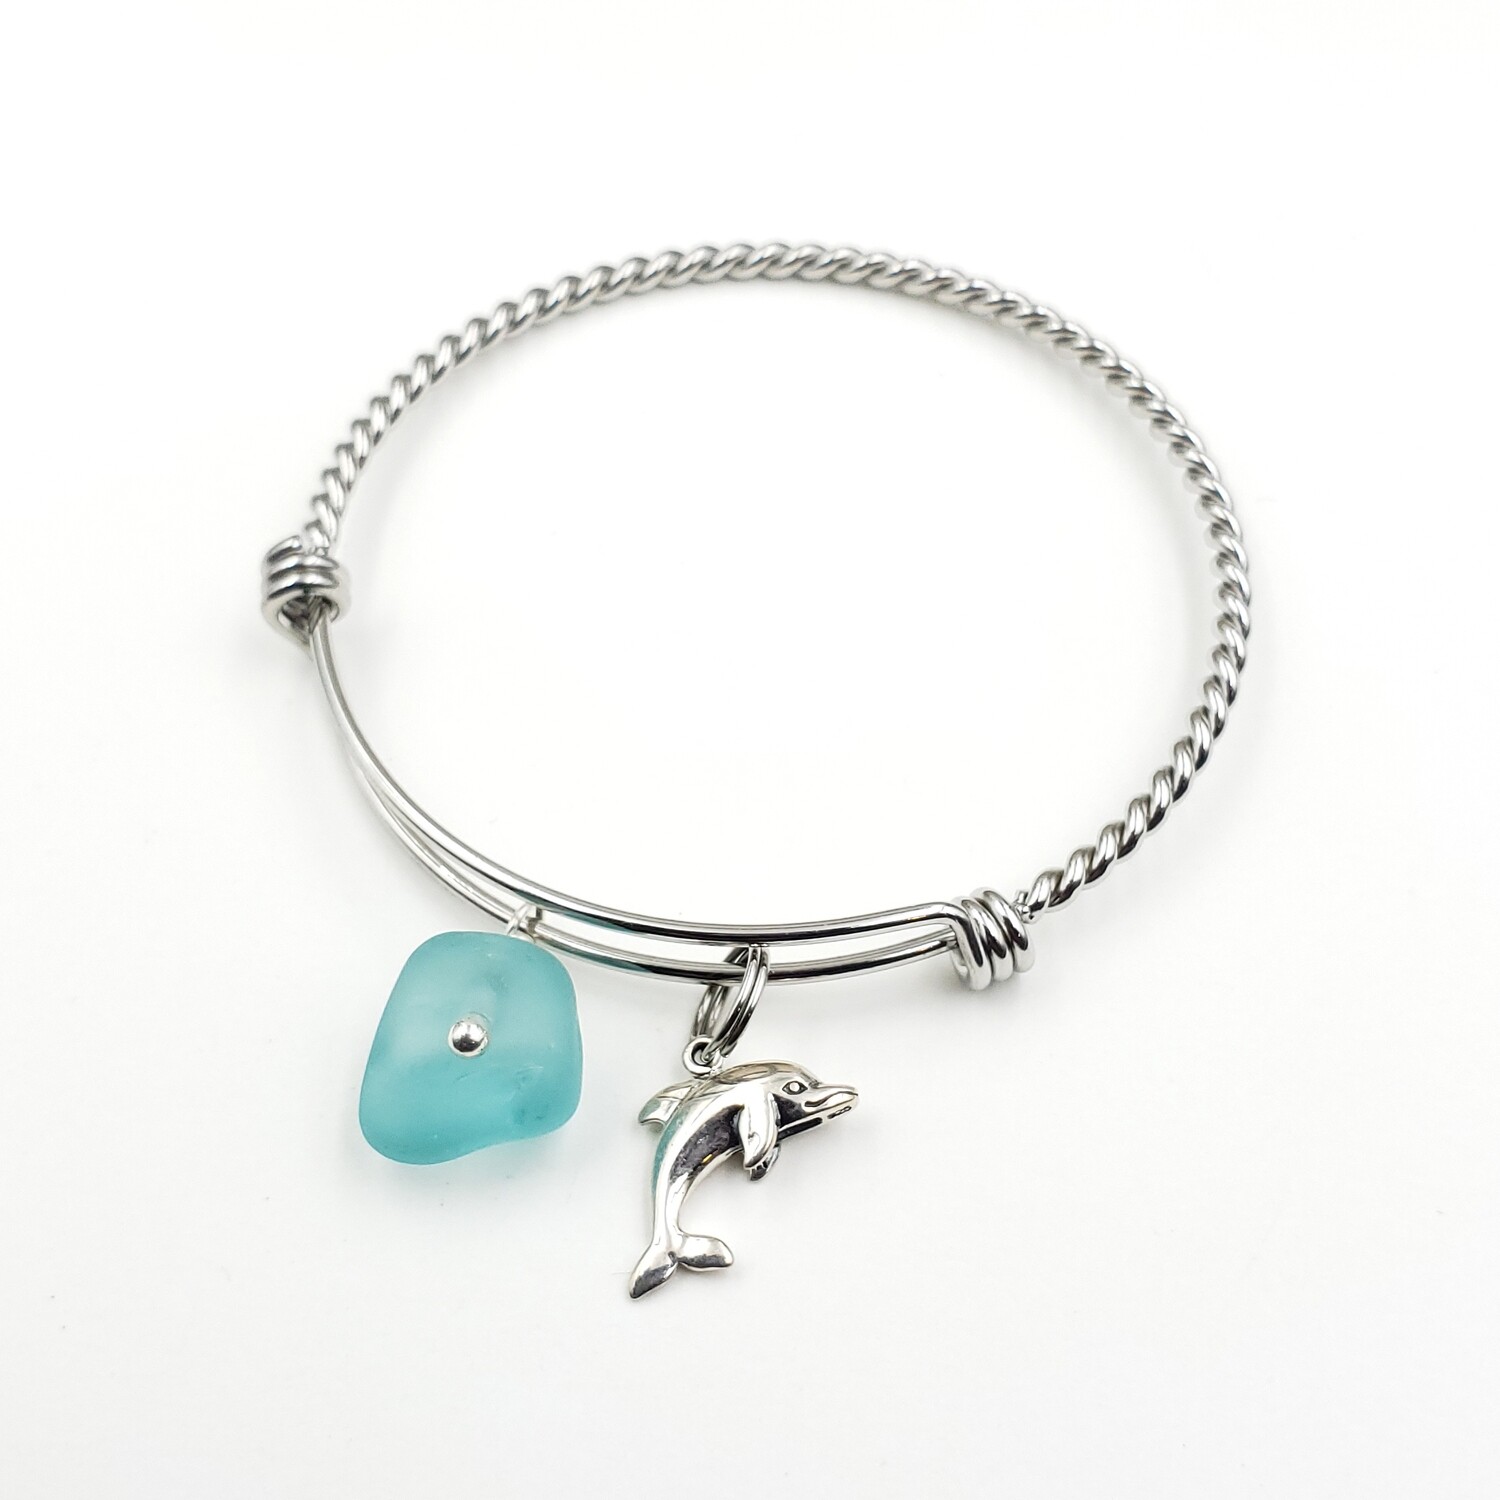 Twisted Bangle Bracelet with Dolphin Charm and Light Blue Lake Erie Beach Glass